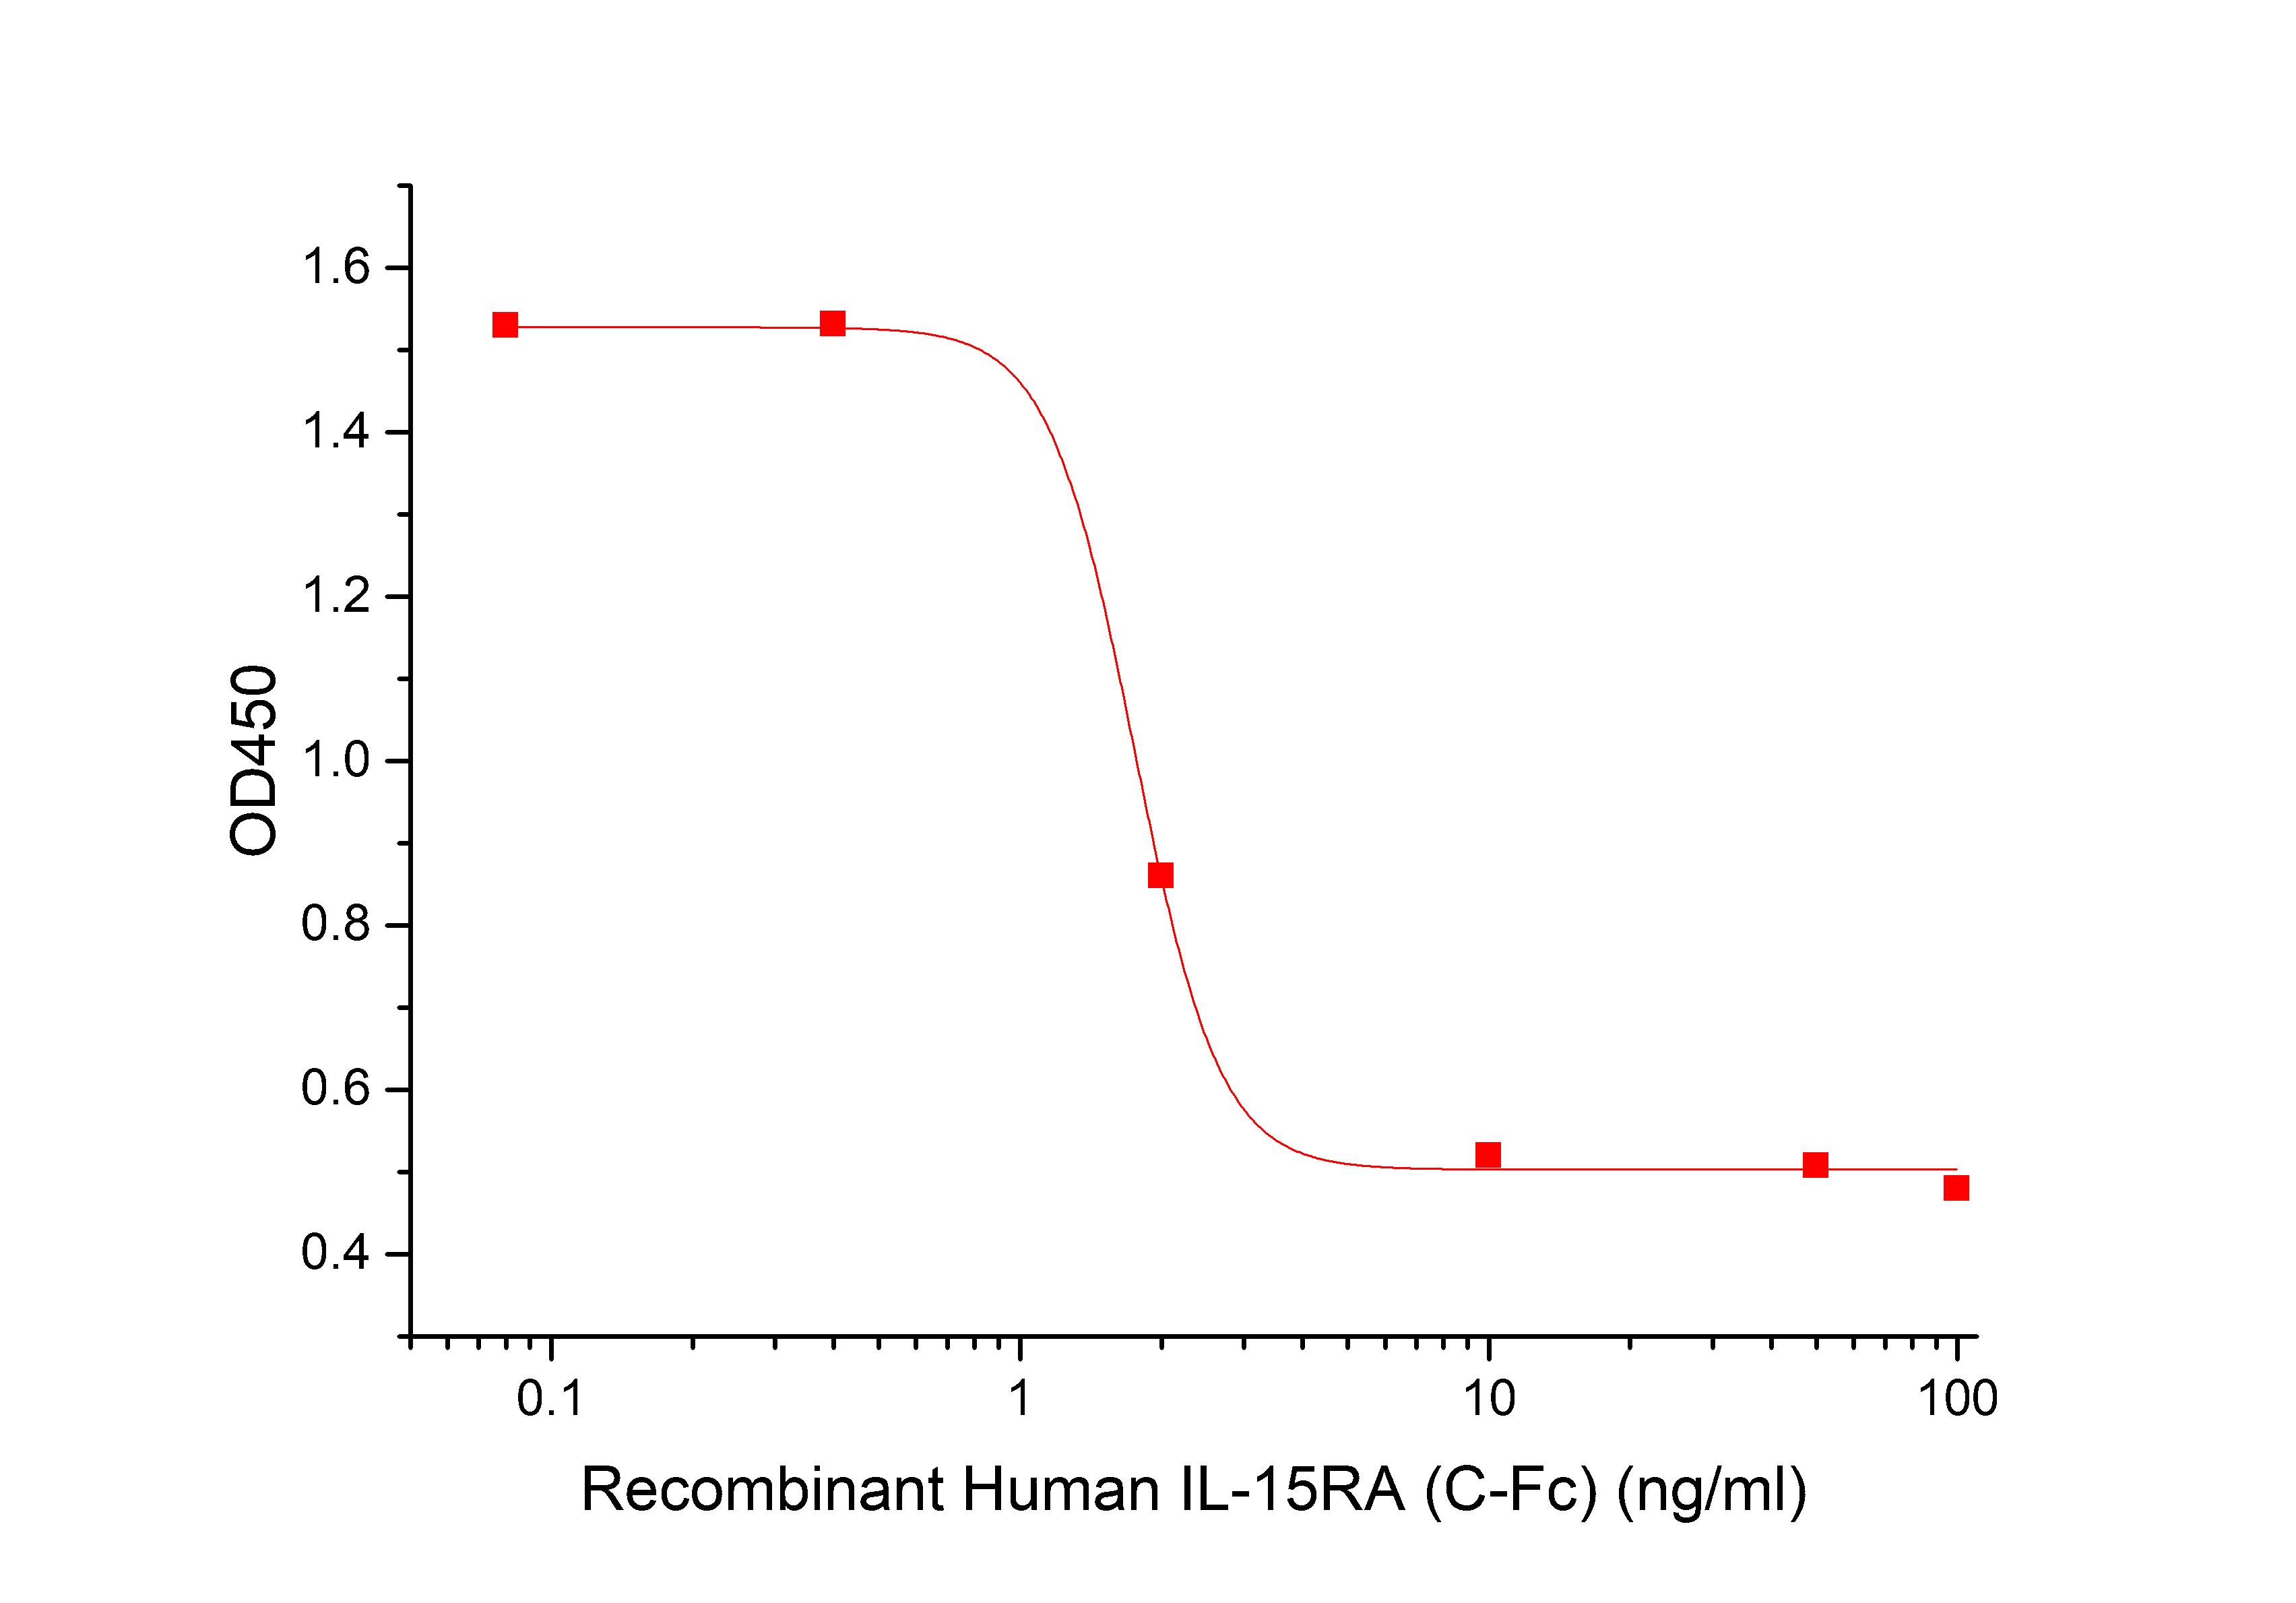 IL-15RA Protein, Human, Recombinant (hFc, Human Cells)